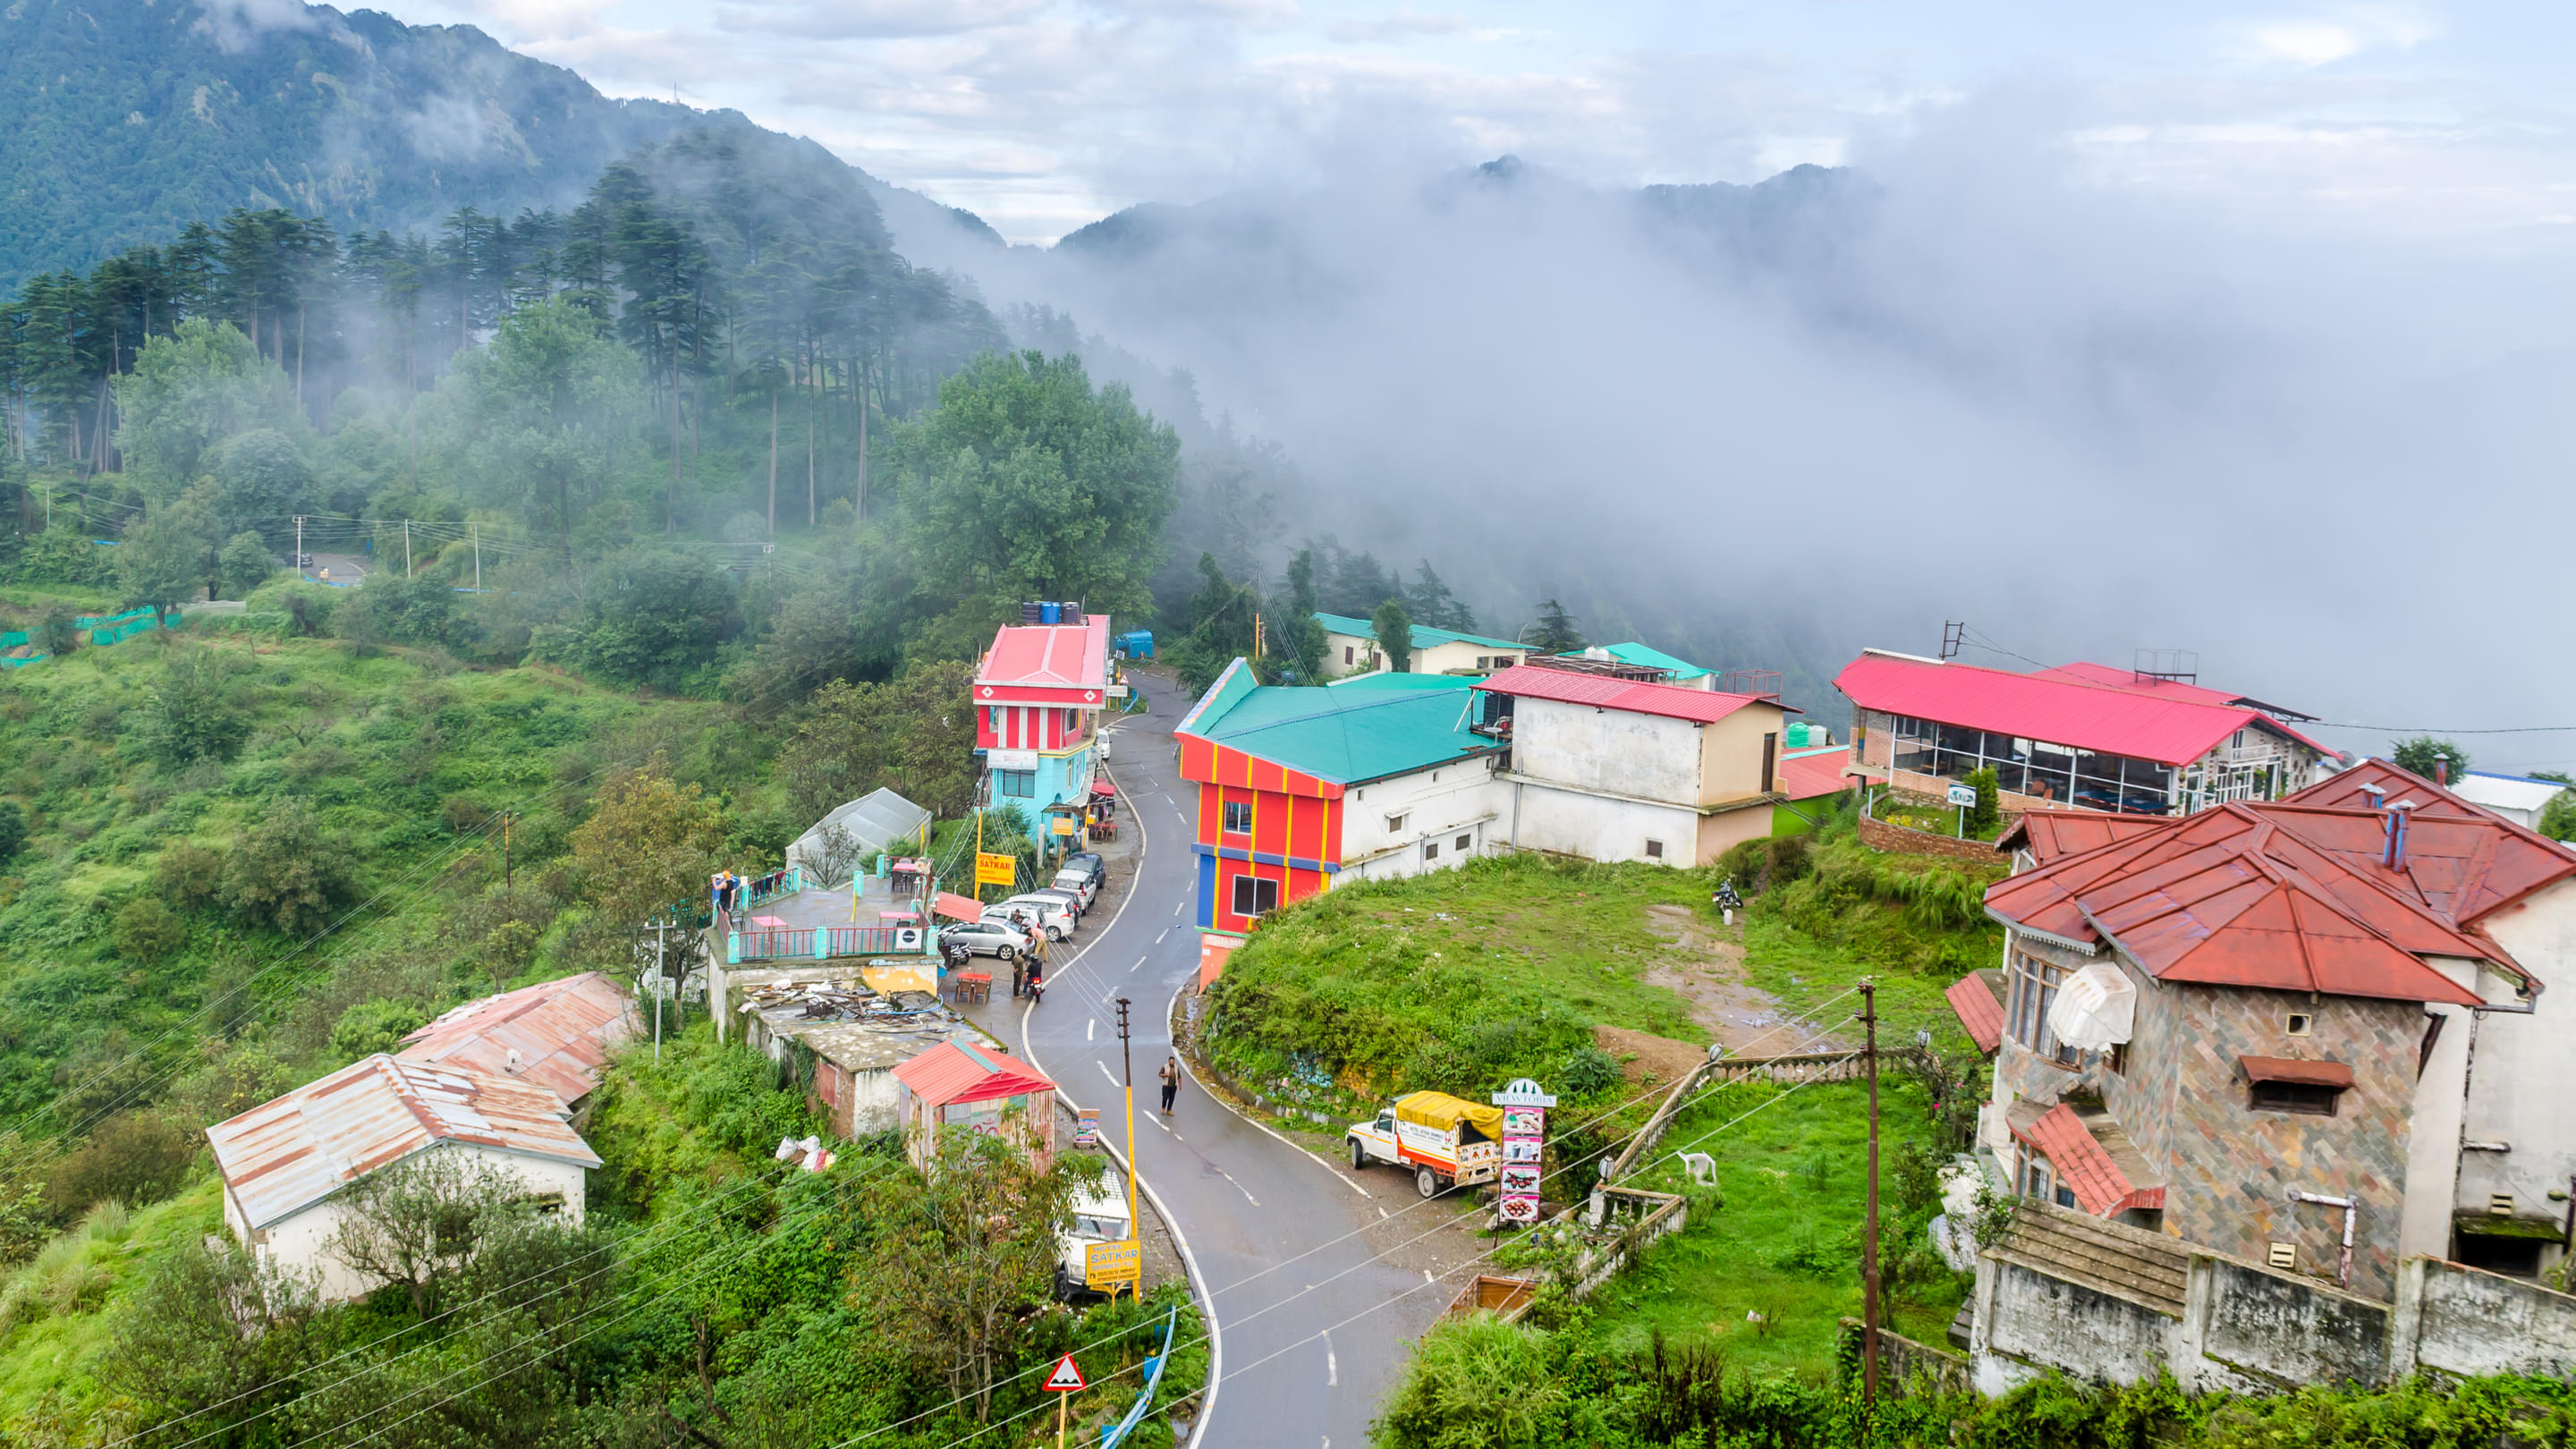 Dhanaulti Packages from Rajkot | Get Upto 40% Off